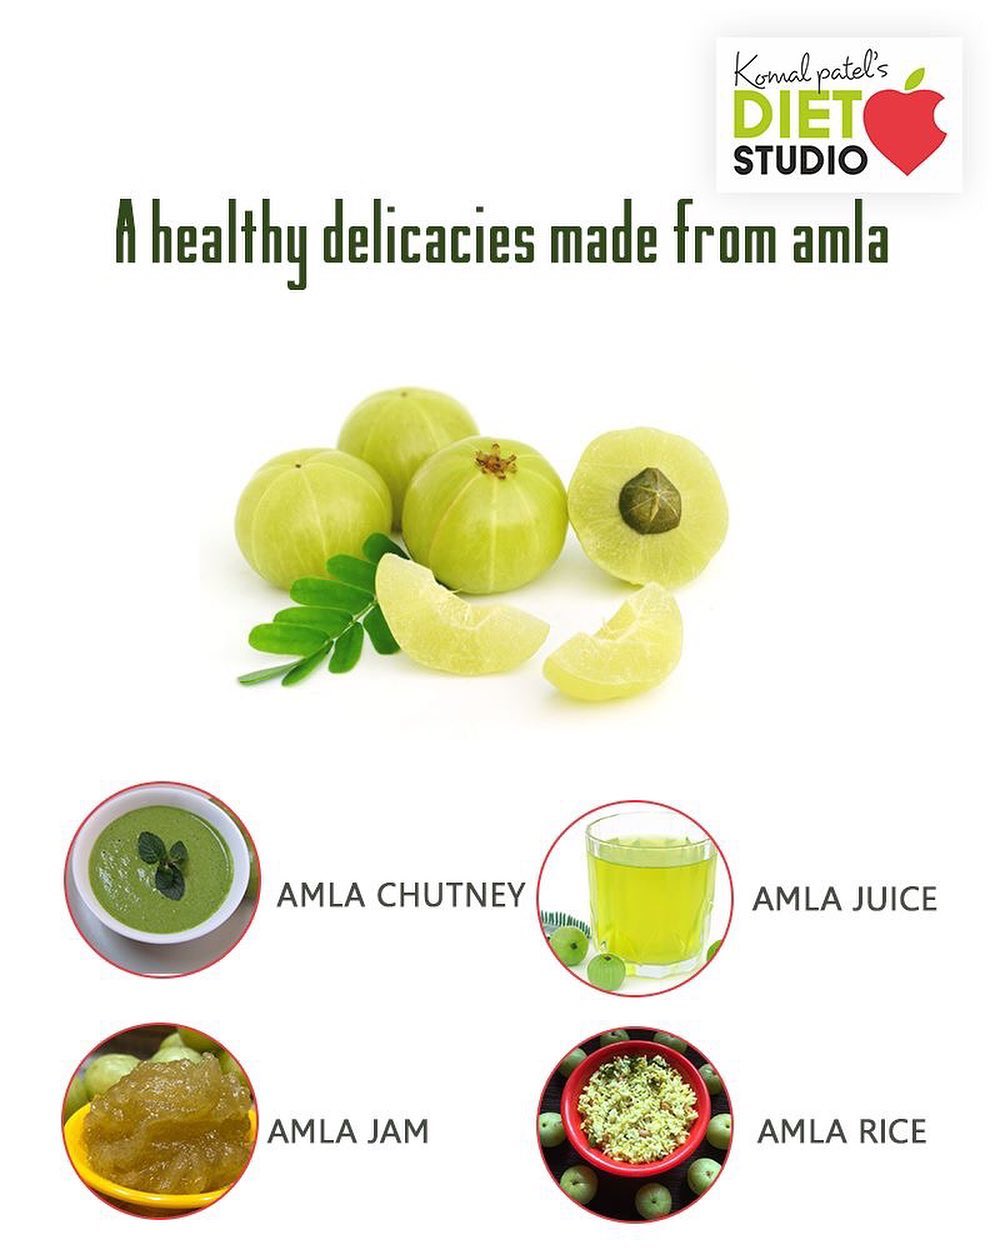 Indian Gooseberry (Amla), due to its powerful antioxidant properties, it has been used in Ayurveda for thousands of years to boost immunity and improve health. Traditionally, it has been used to treat cold and cough, improve digestion, enhance fertility, and improve hair growth.

#komalpatel #diet #goodfood #eathealthy #goodhealth